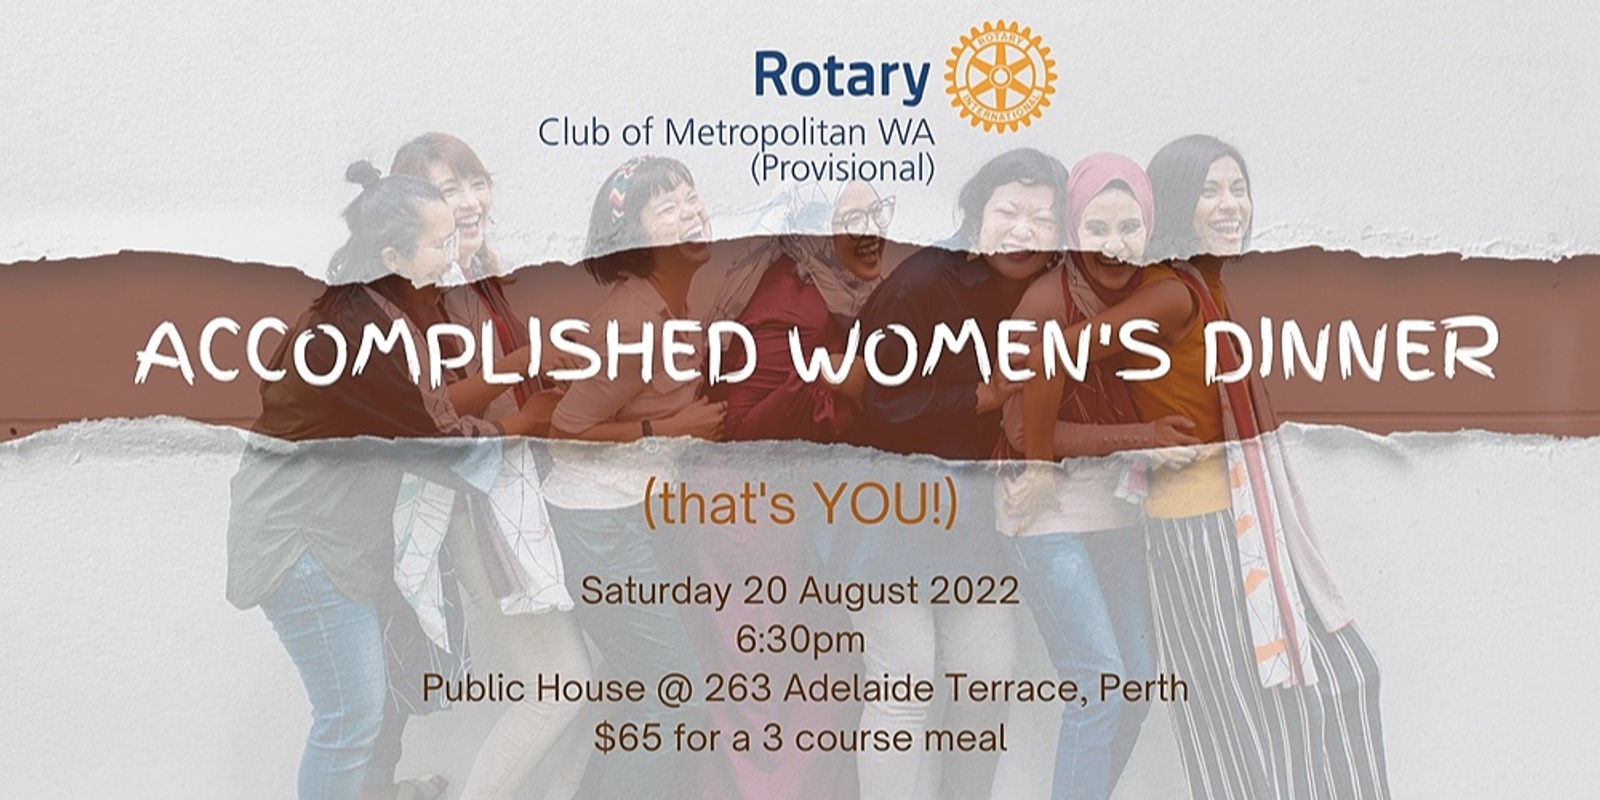 Banner image for Rotary Club of Metropolitan WA - Accomplished Women's Dinner